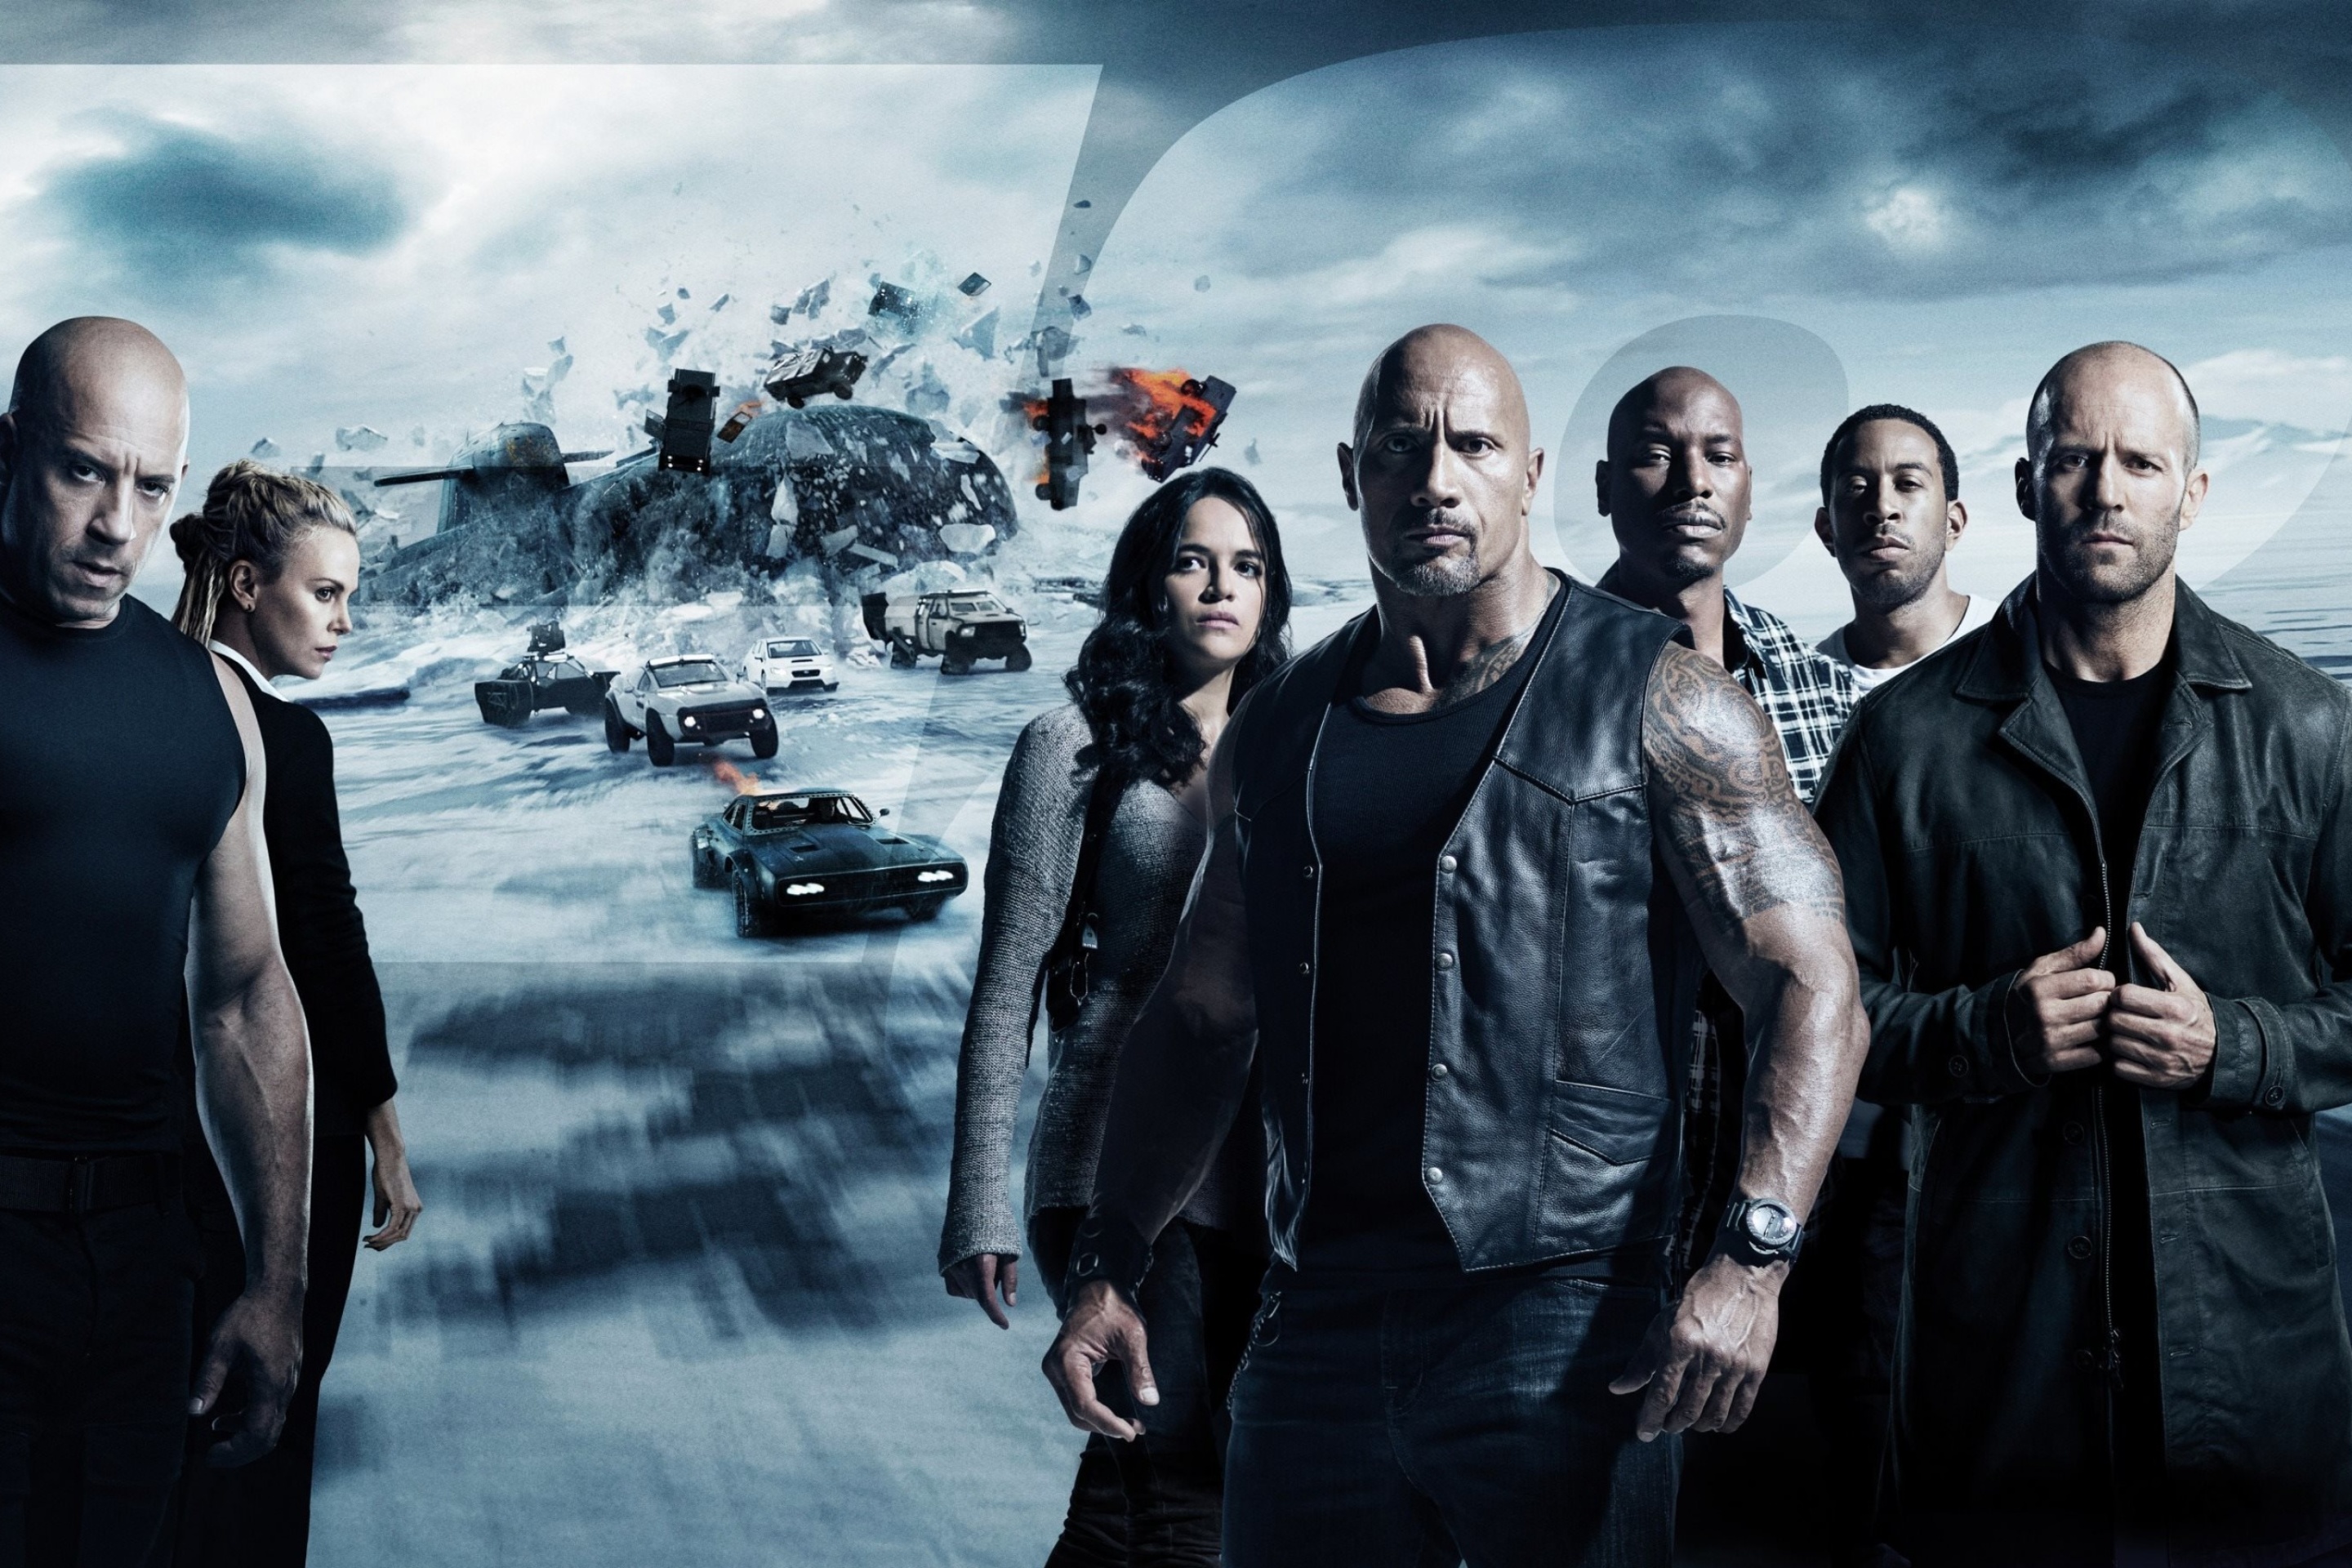 Sfondi The Fate of the Furious with Vin Diesel, Dwayne Johnson, Charlize Theron 2880x1920